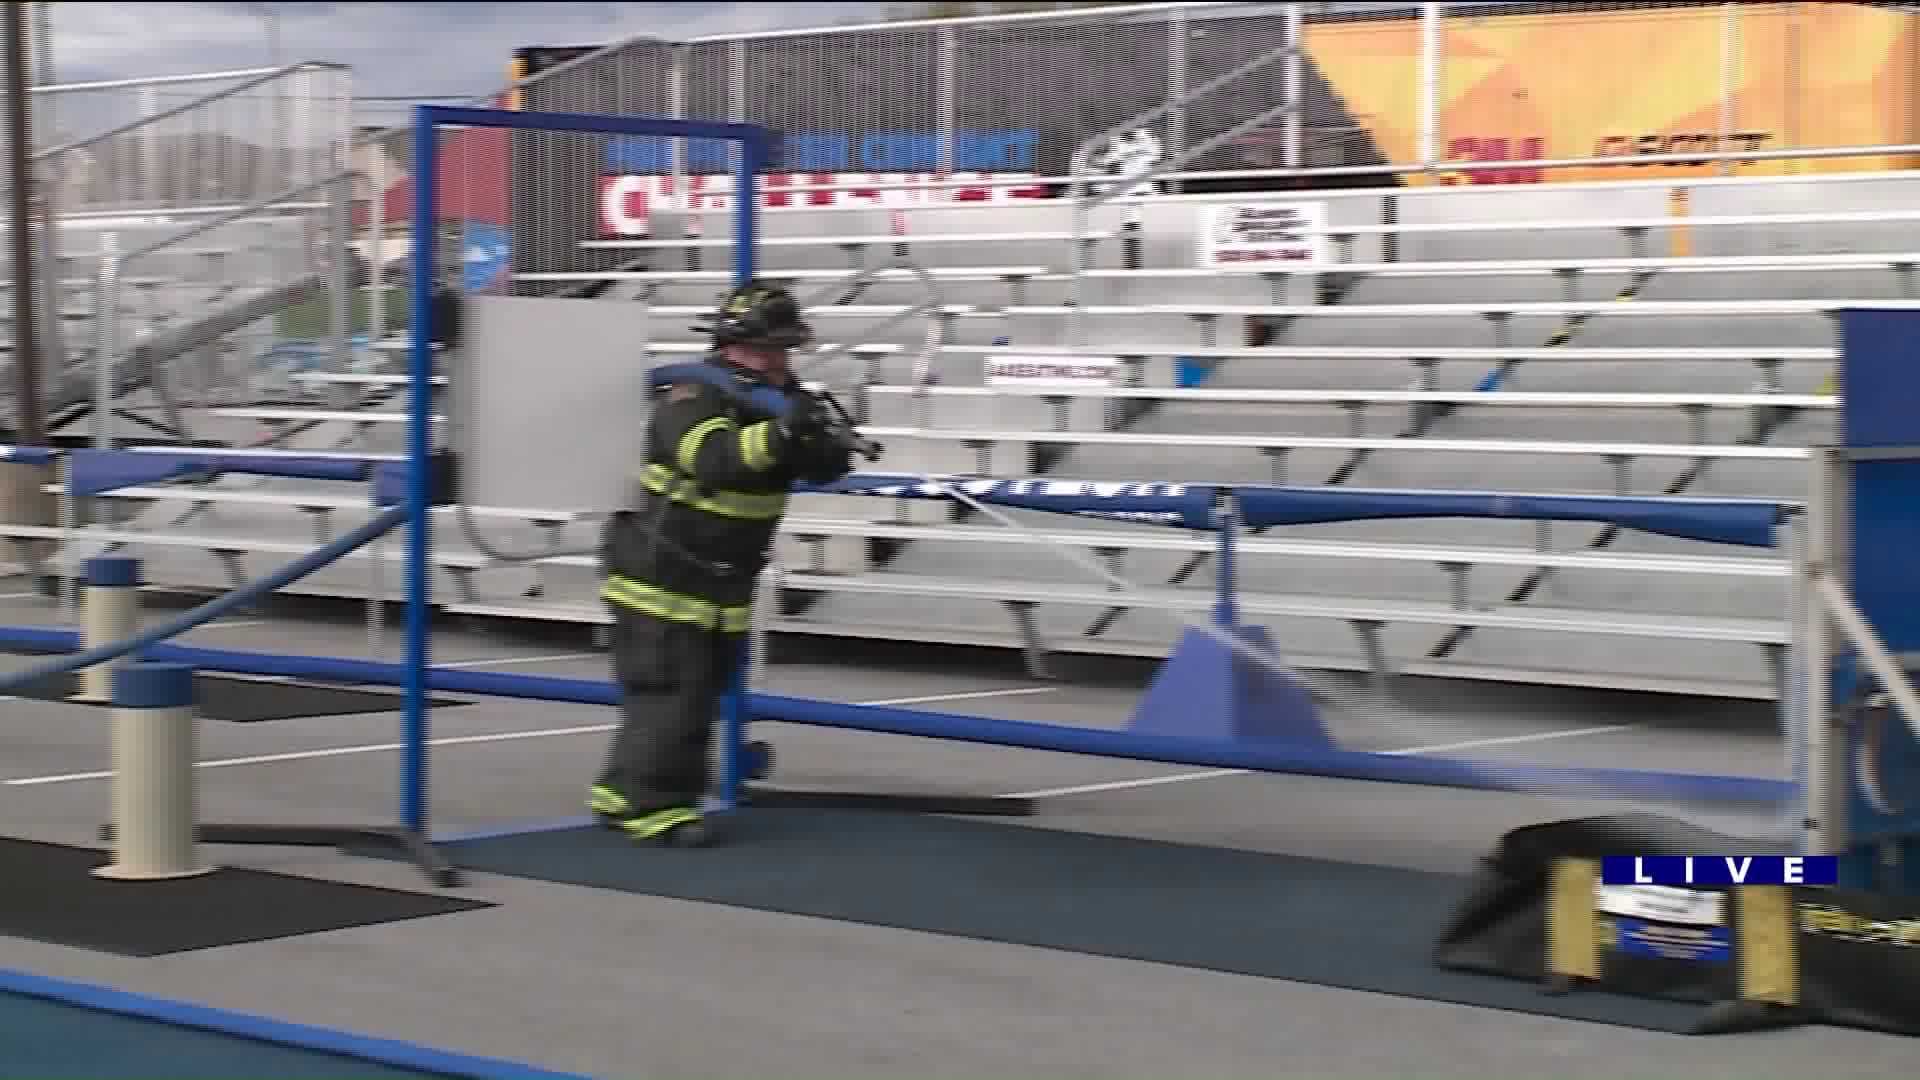 Around Town previews the Scott Firefighter Combat Challenge in Tinley Park